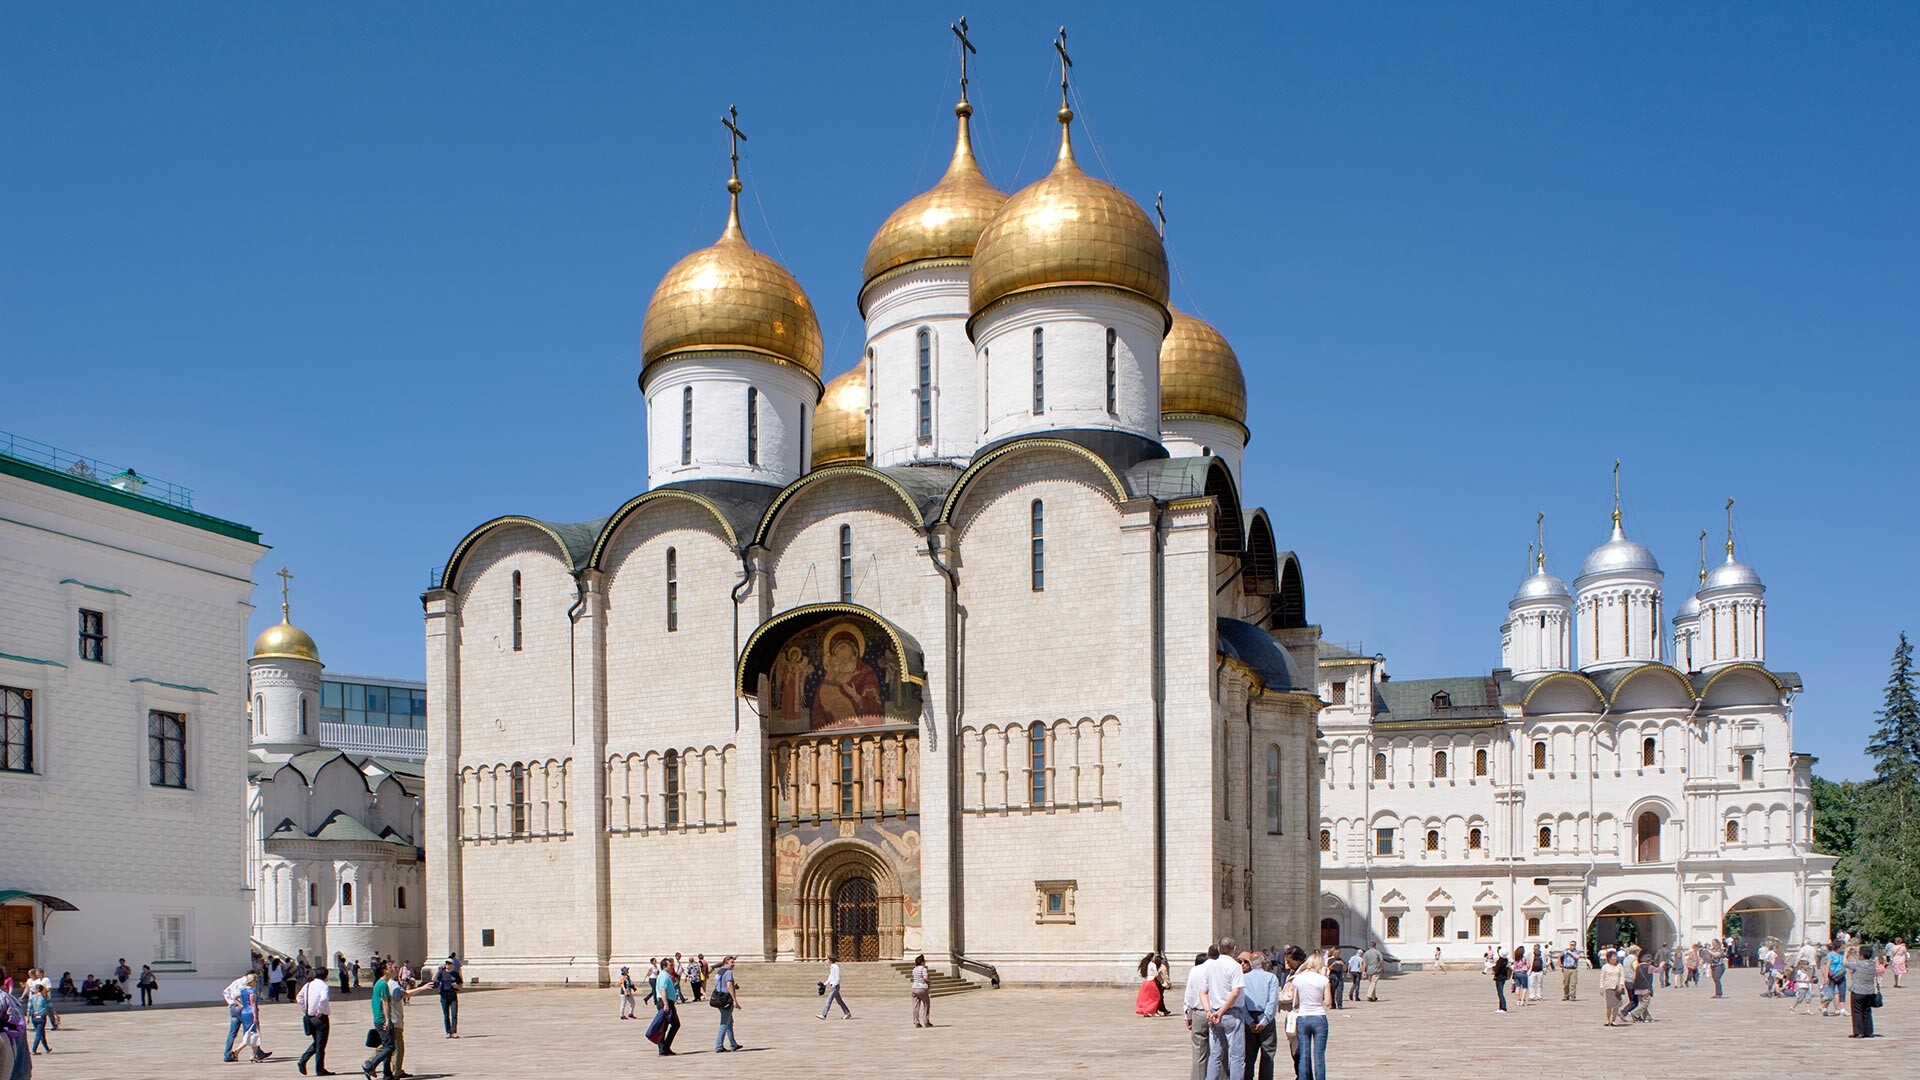 Kremlin, Cathedral Square, southeast view. From left: Faceted Chamber, Church of Deposition of the Robe, Dormition Cathedral, Patriarchal Chambers & Church of the Twelve Apostles. June 17, 2012